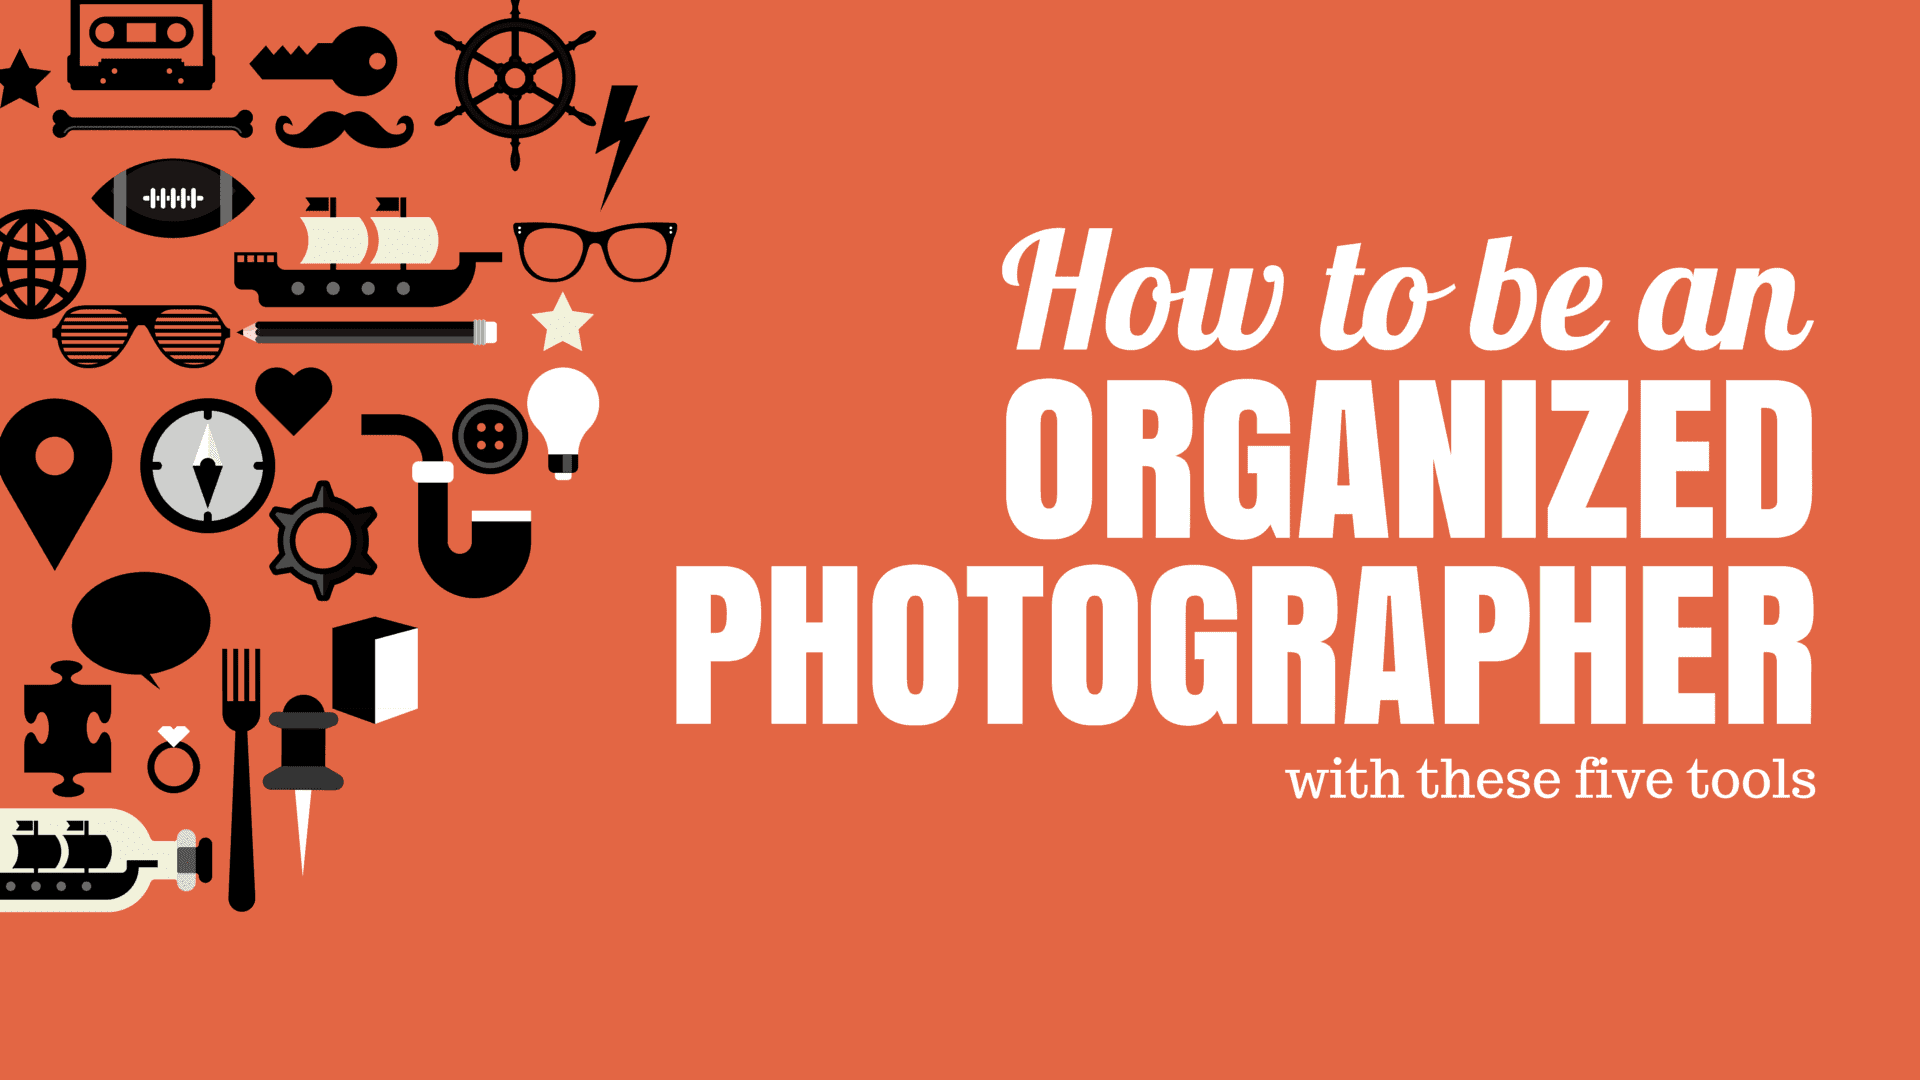 How to be an organized photographer